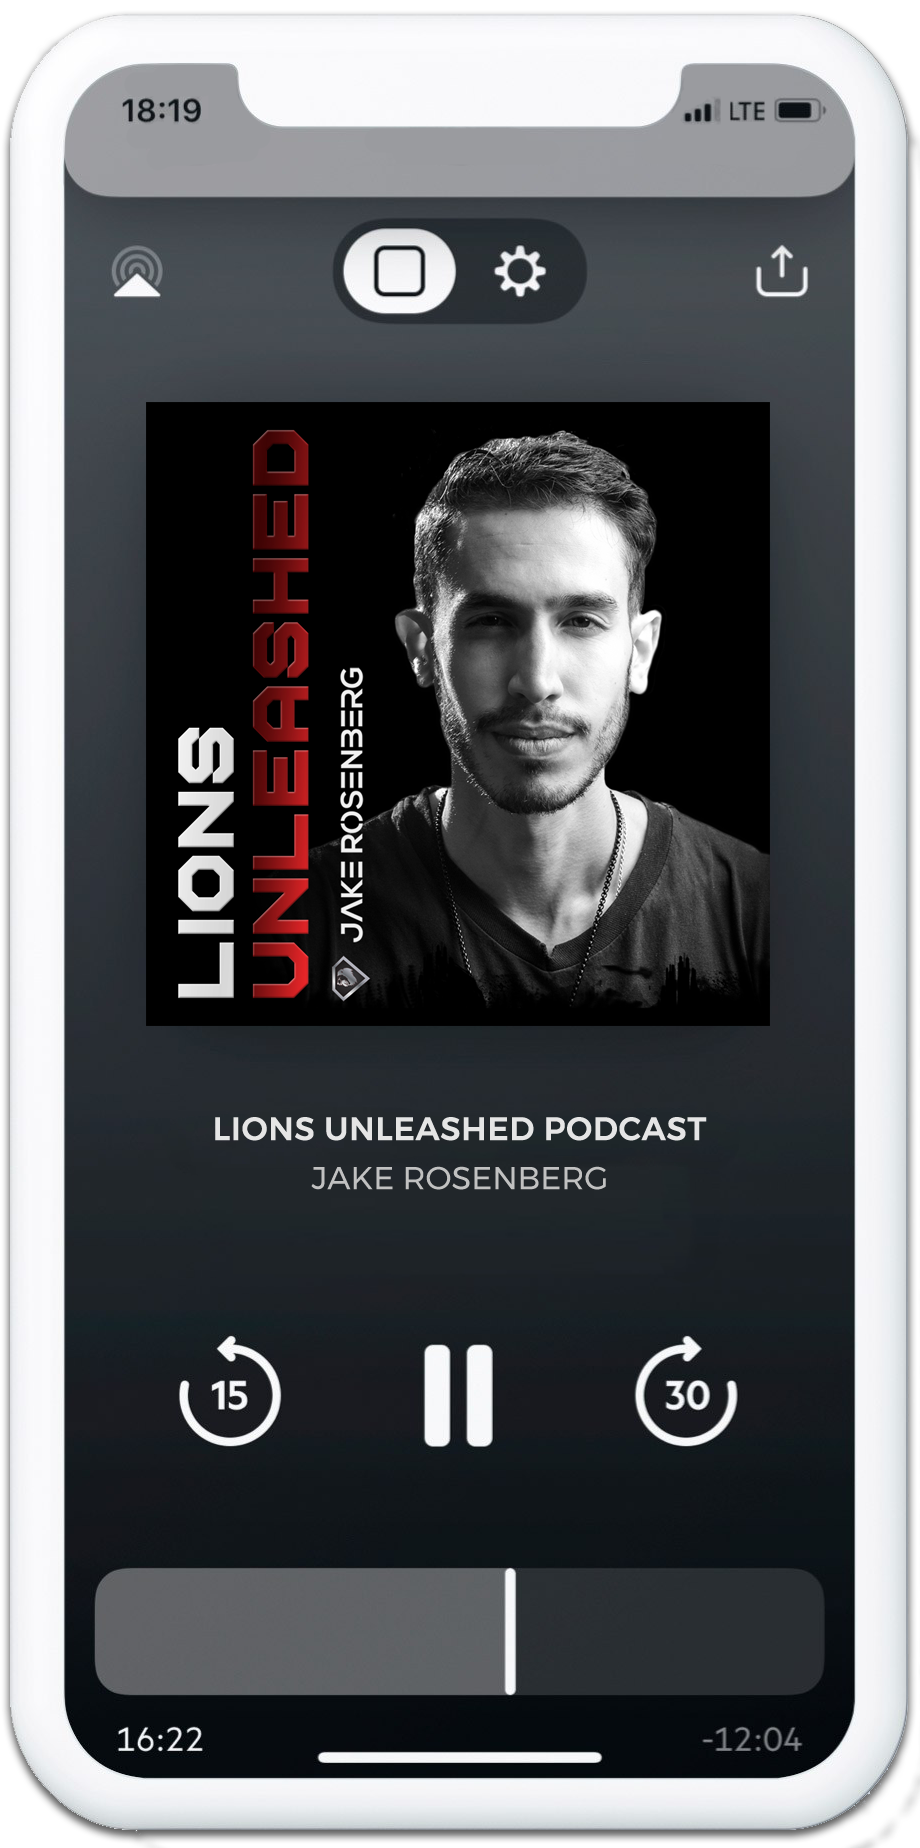 Listen to the Lions Unleashed Podcast on the go